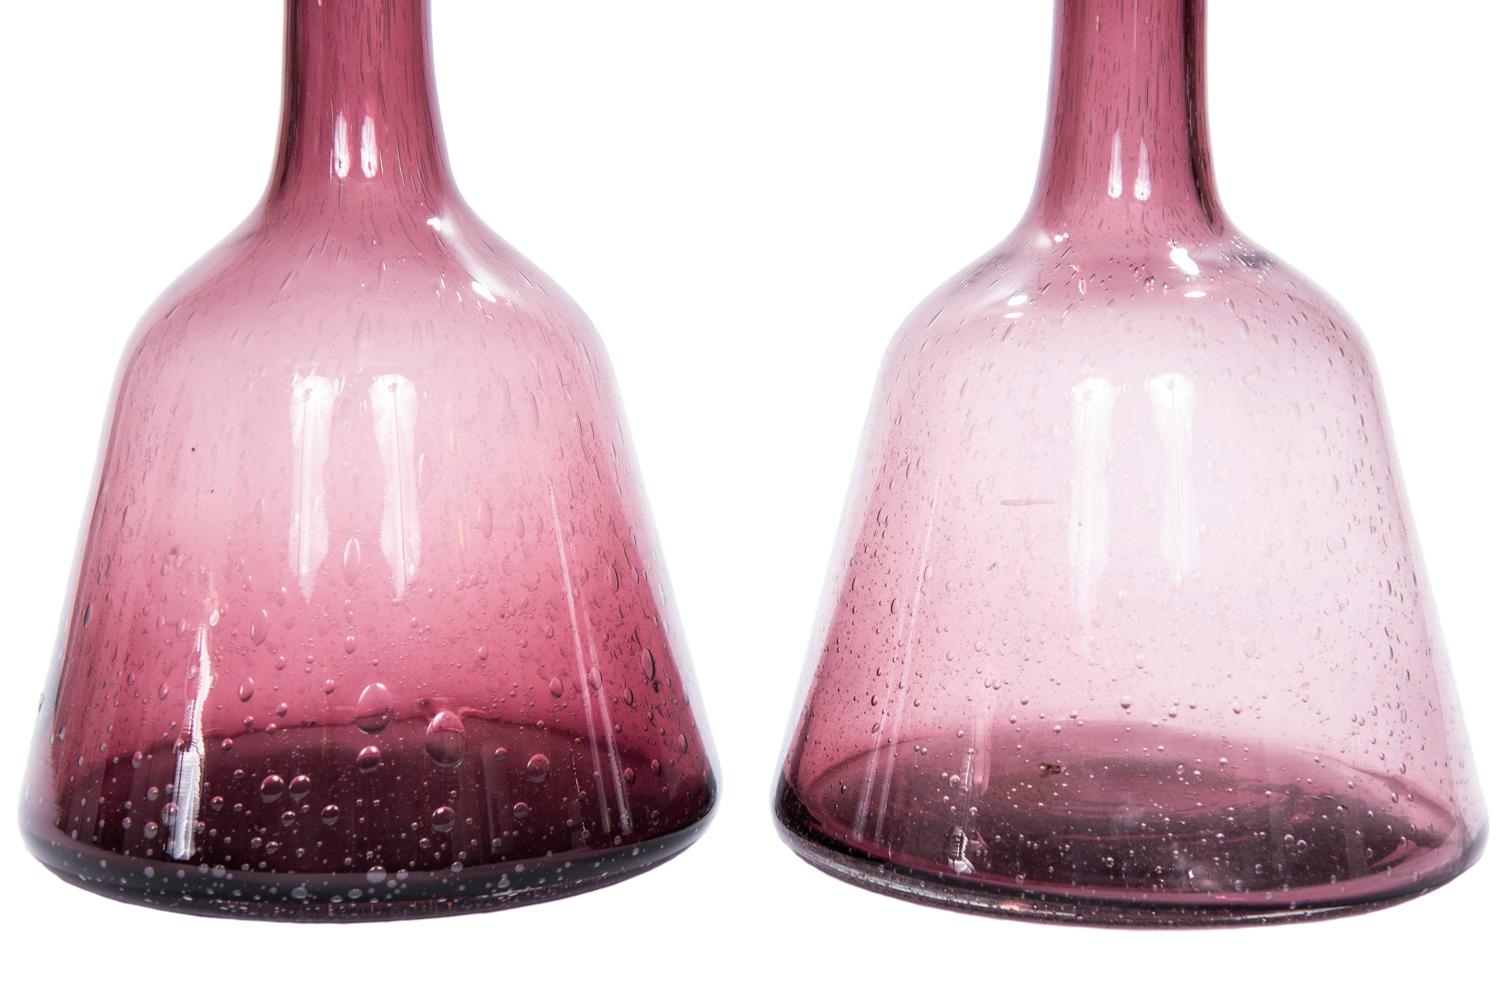 It is always awesome to have a pair of decorative decanters! They are weighty with random bubble inclusions encased in rich amethyst colored glass. These beauties are Italian and I suspect are Murano. 

 